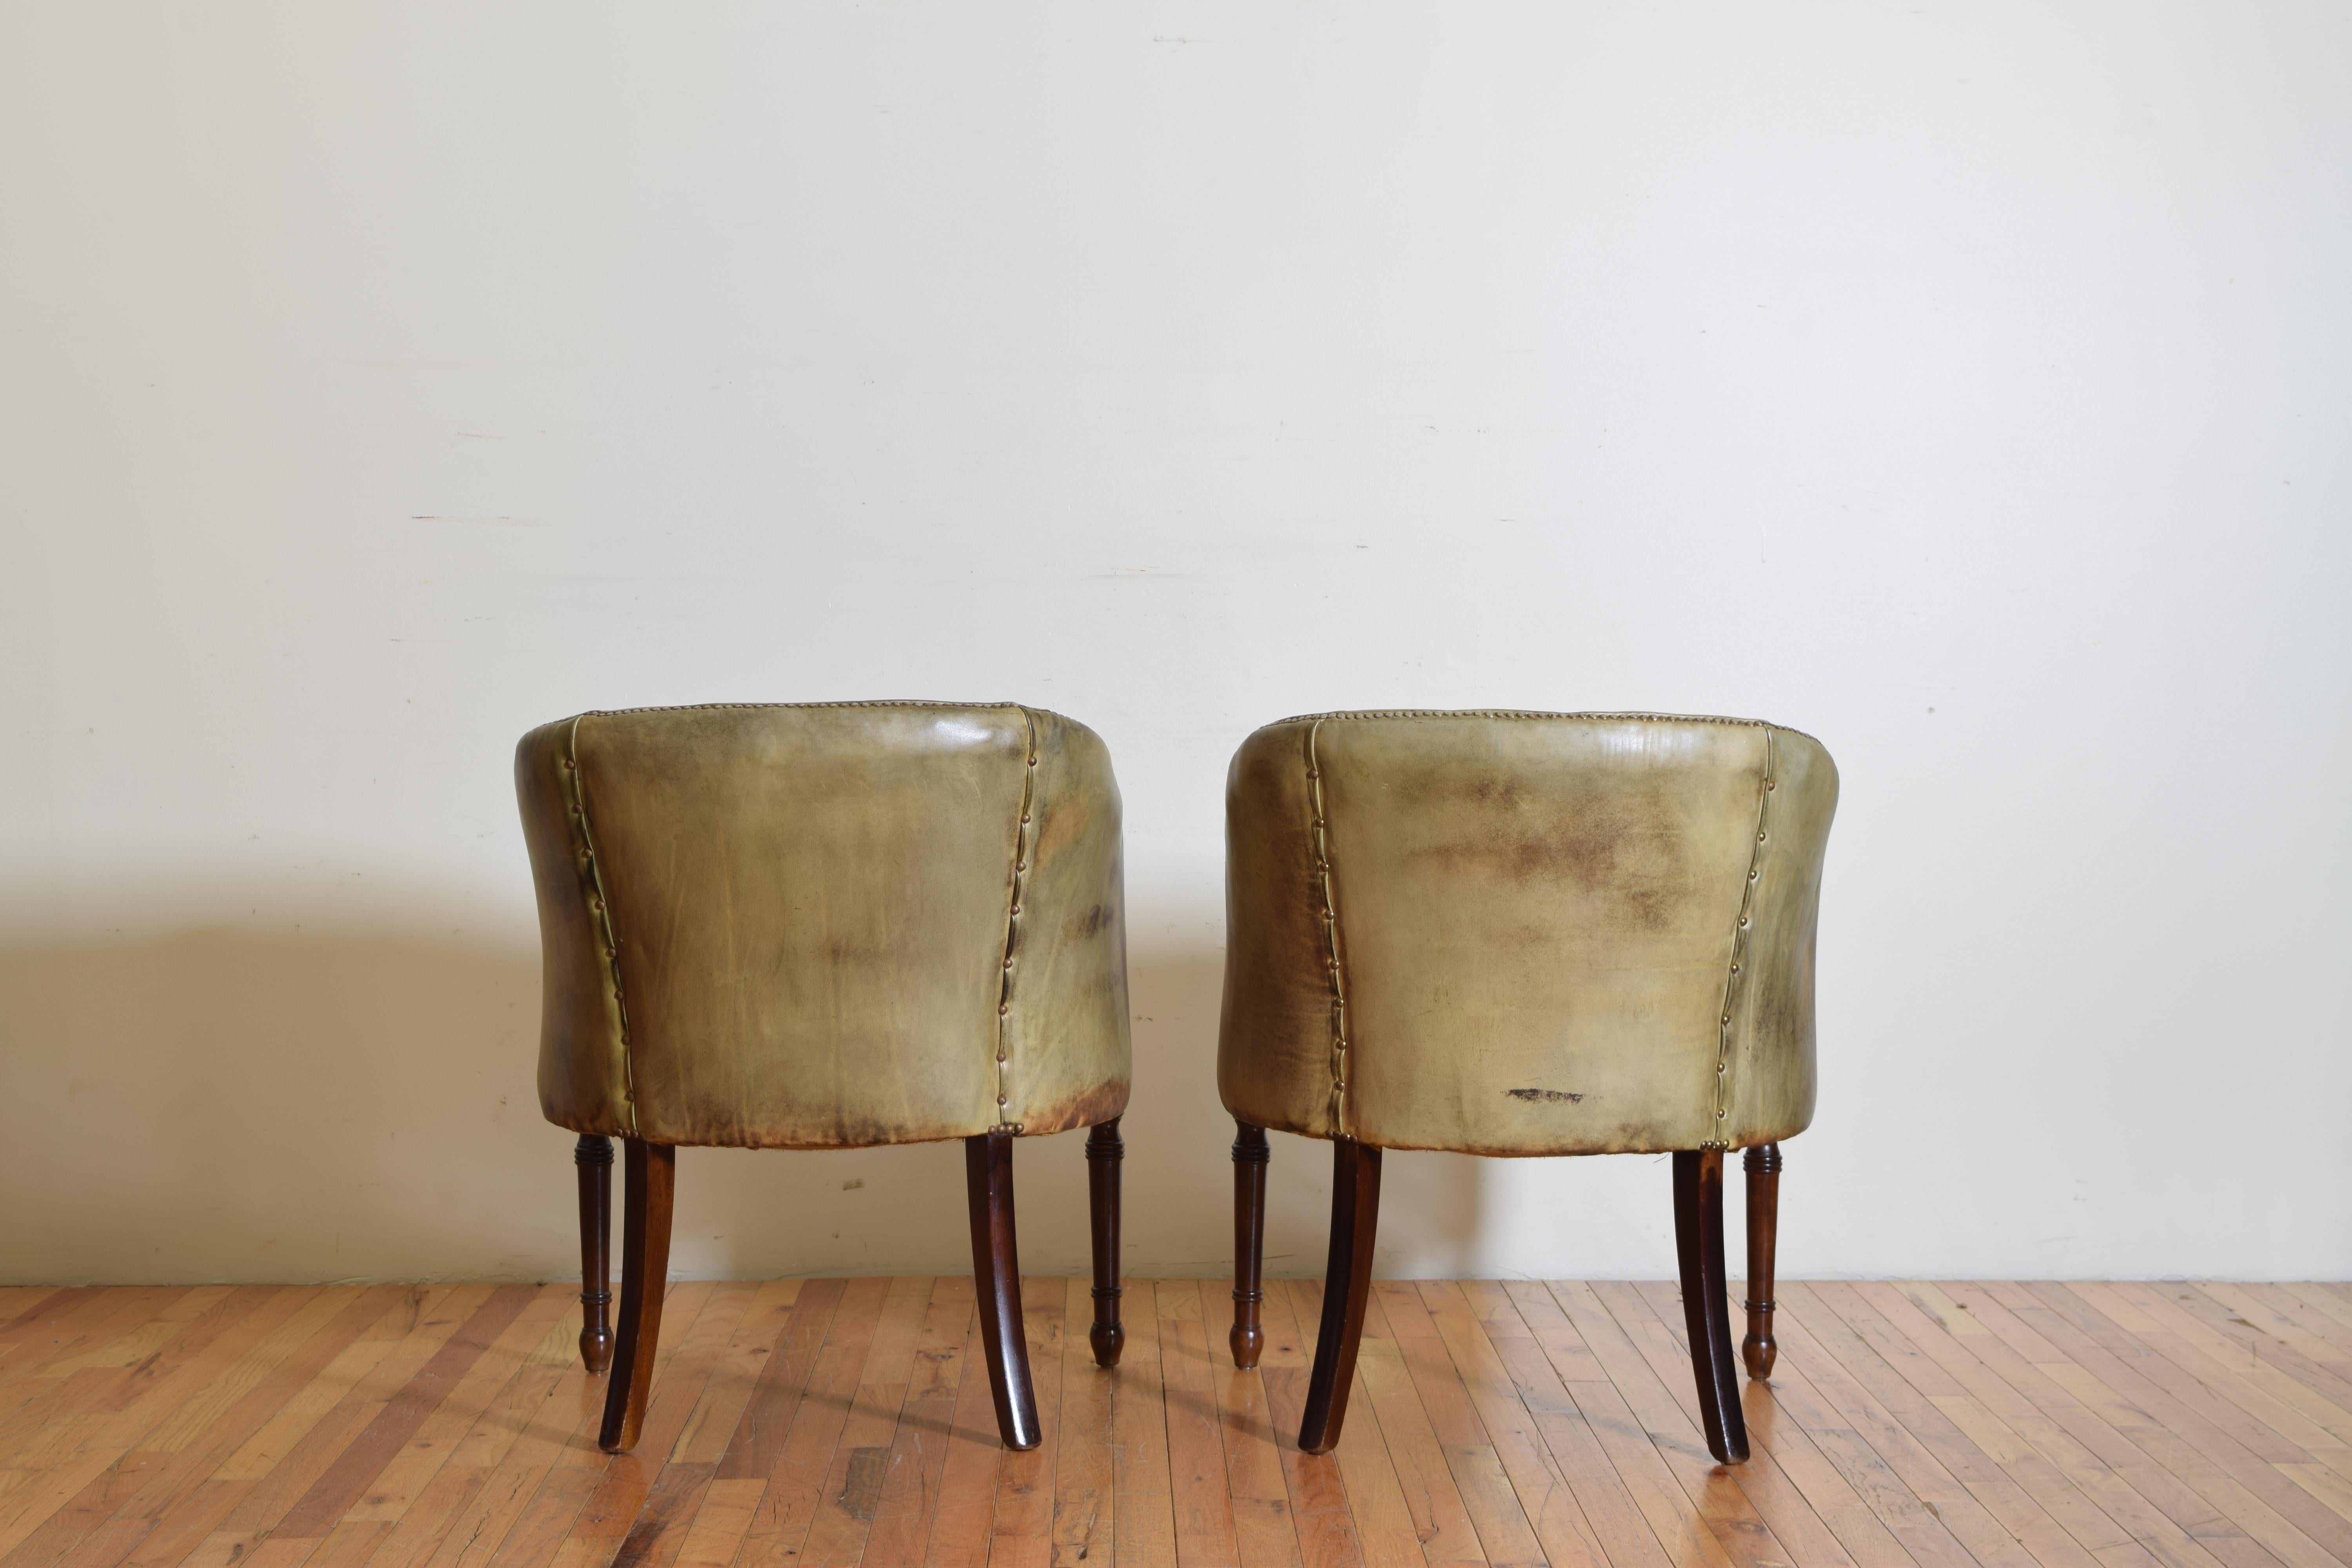 Pair of English Regency Style Mahogany Club Chairs in Green Leather 20th Century 2